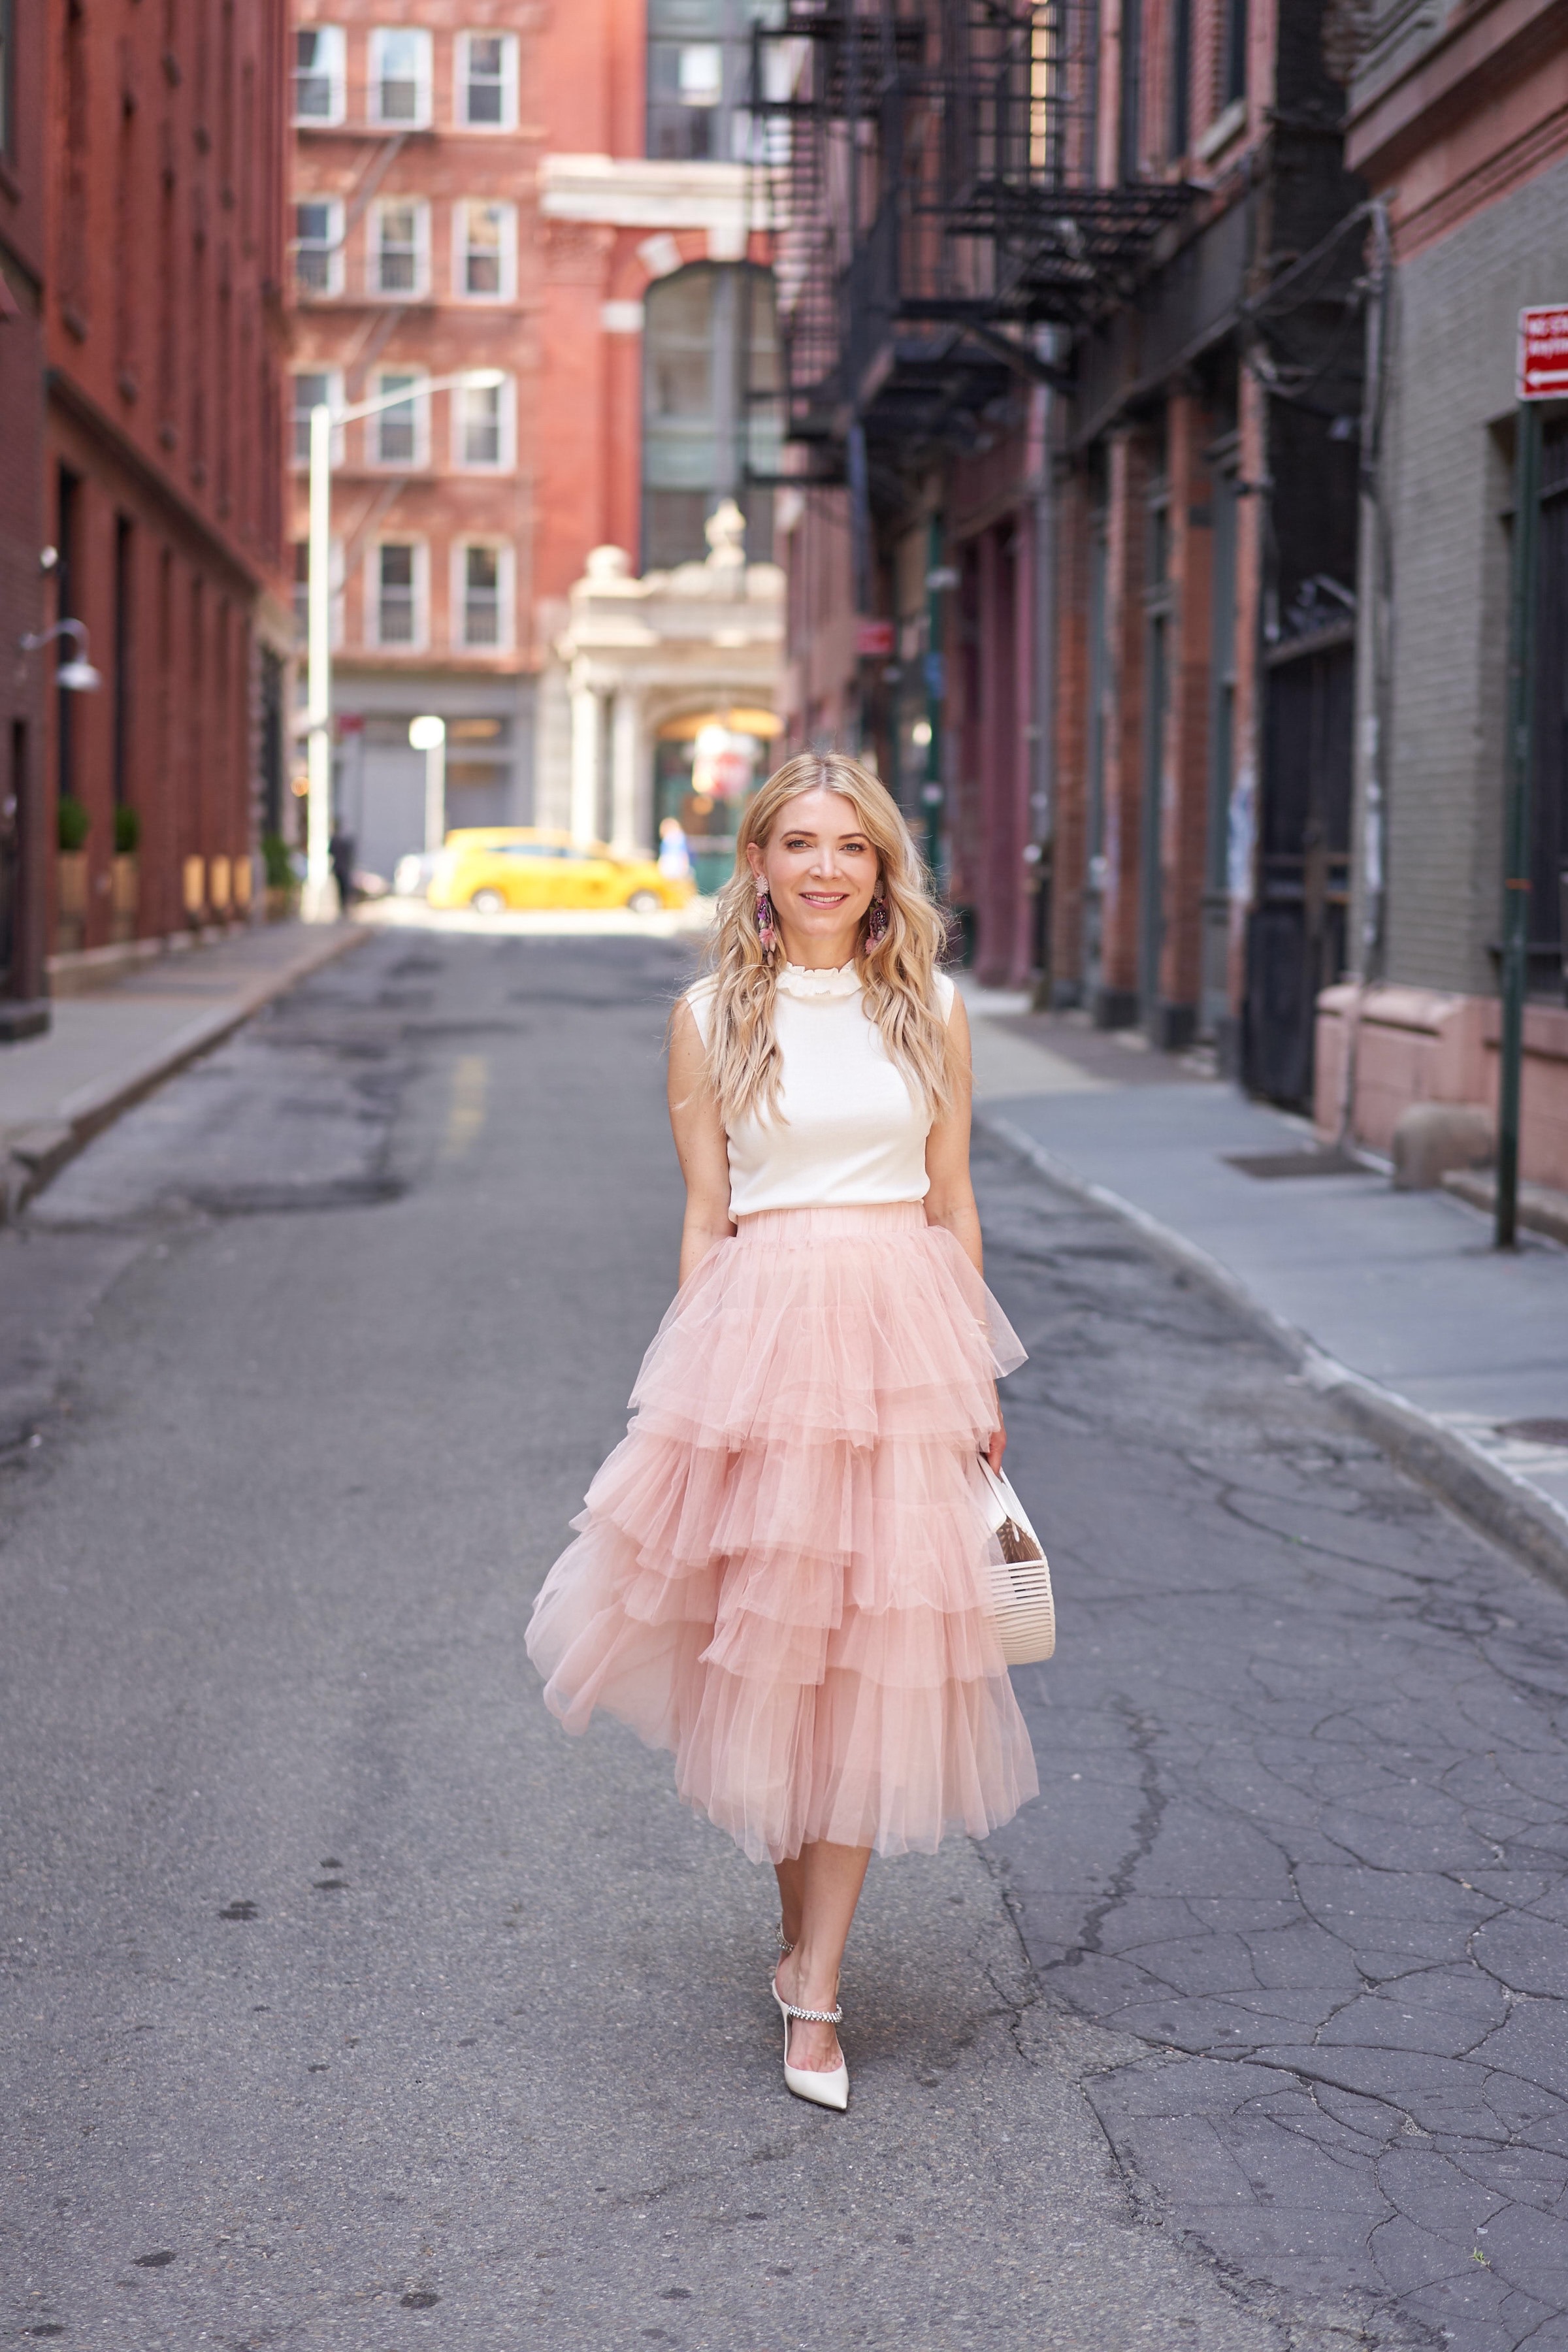 Two Tulle Skirt Looks From Chicwish!